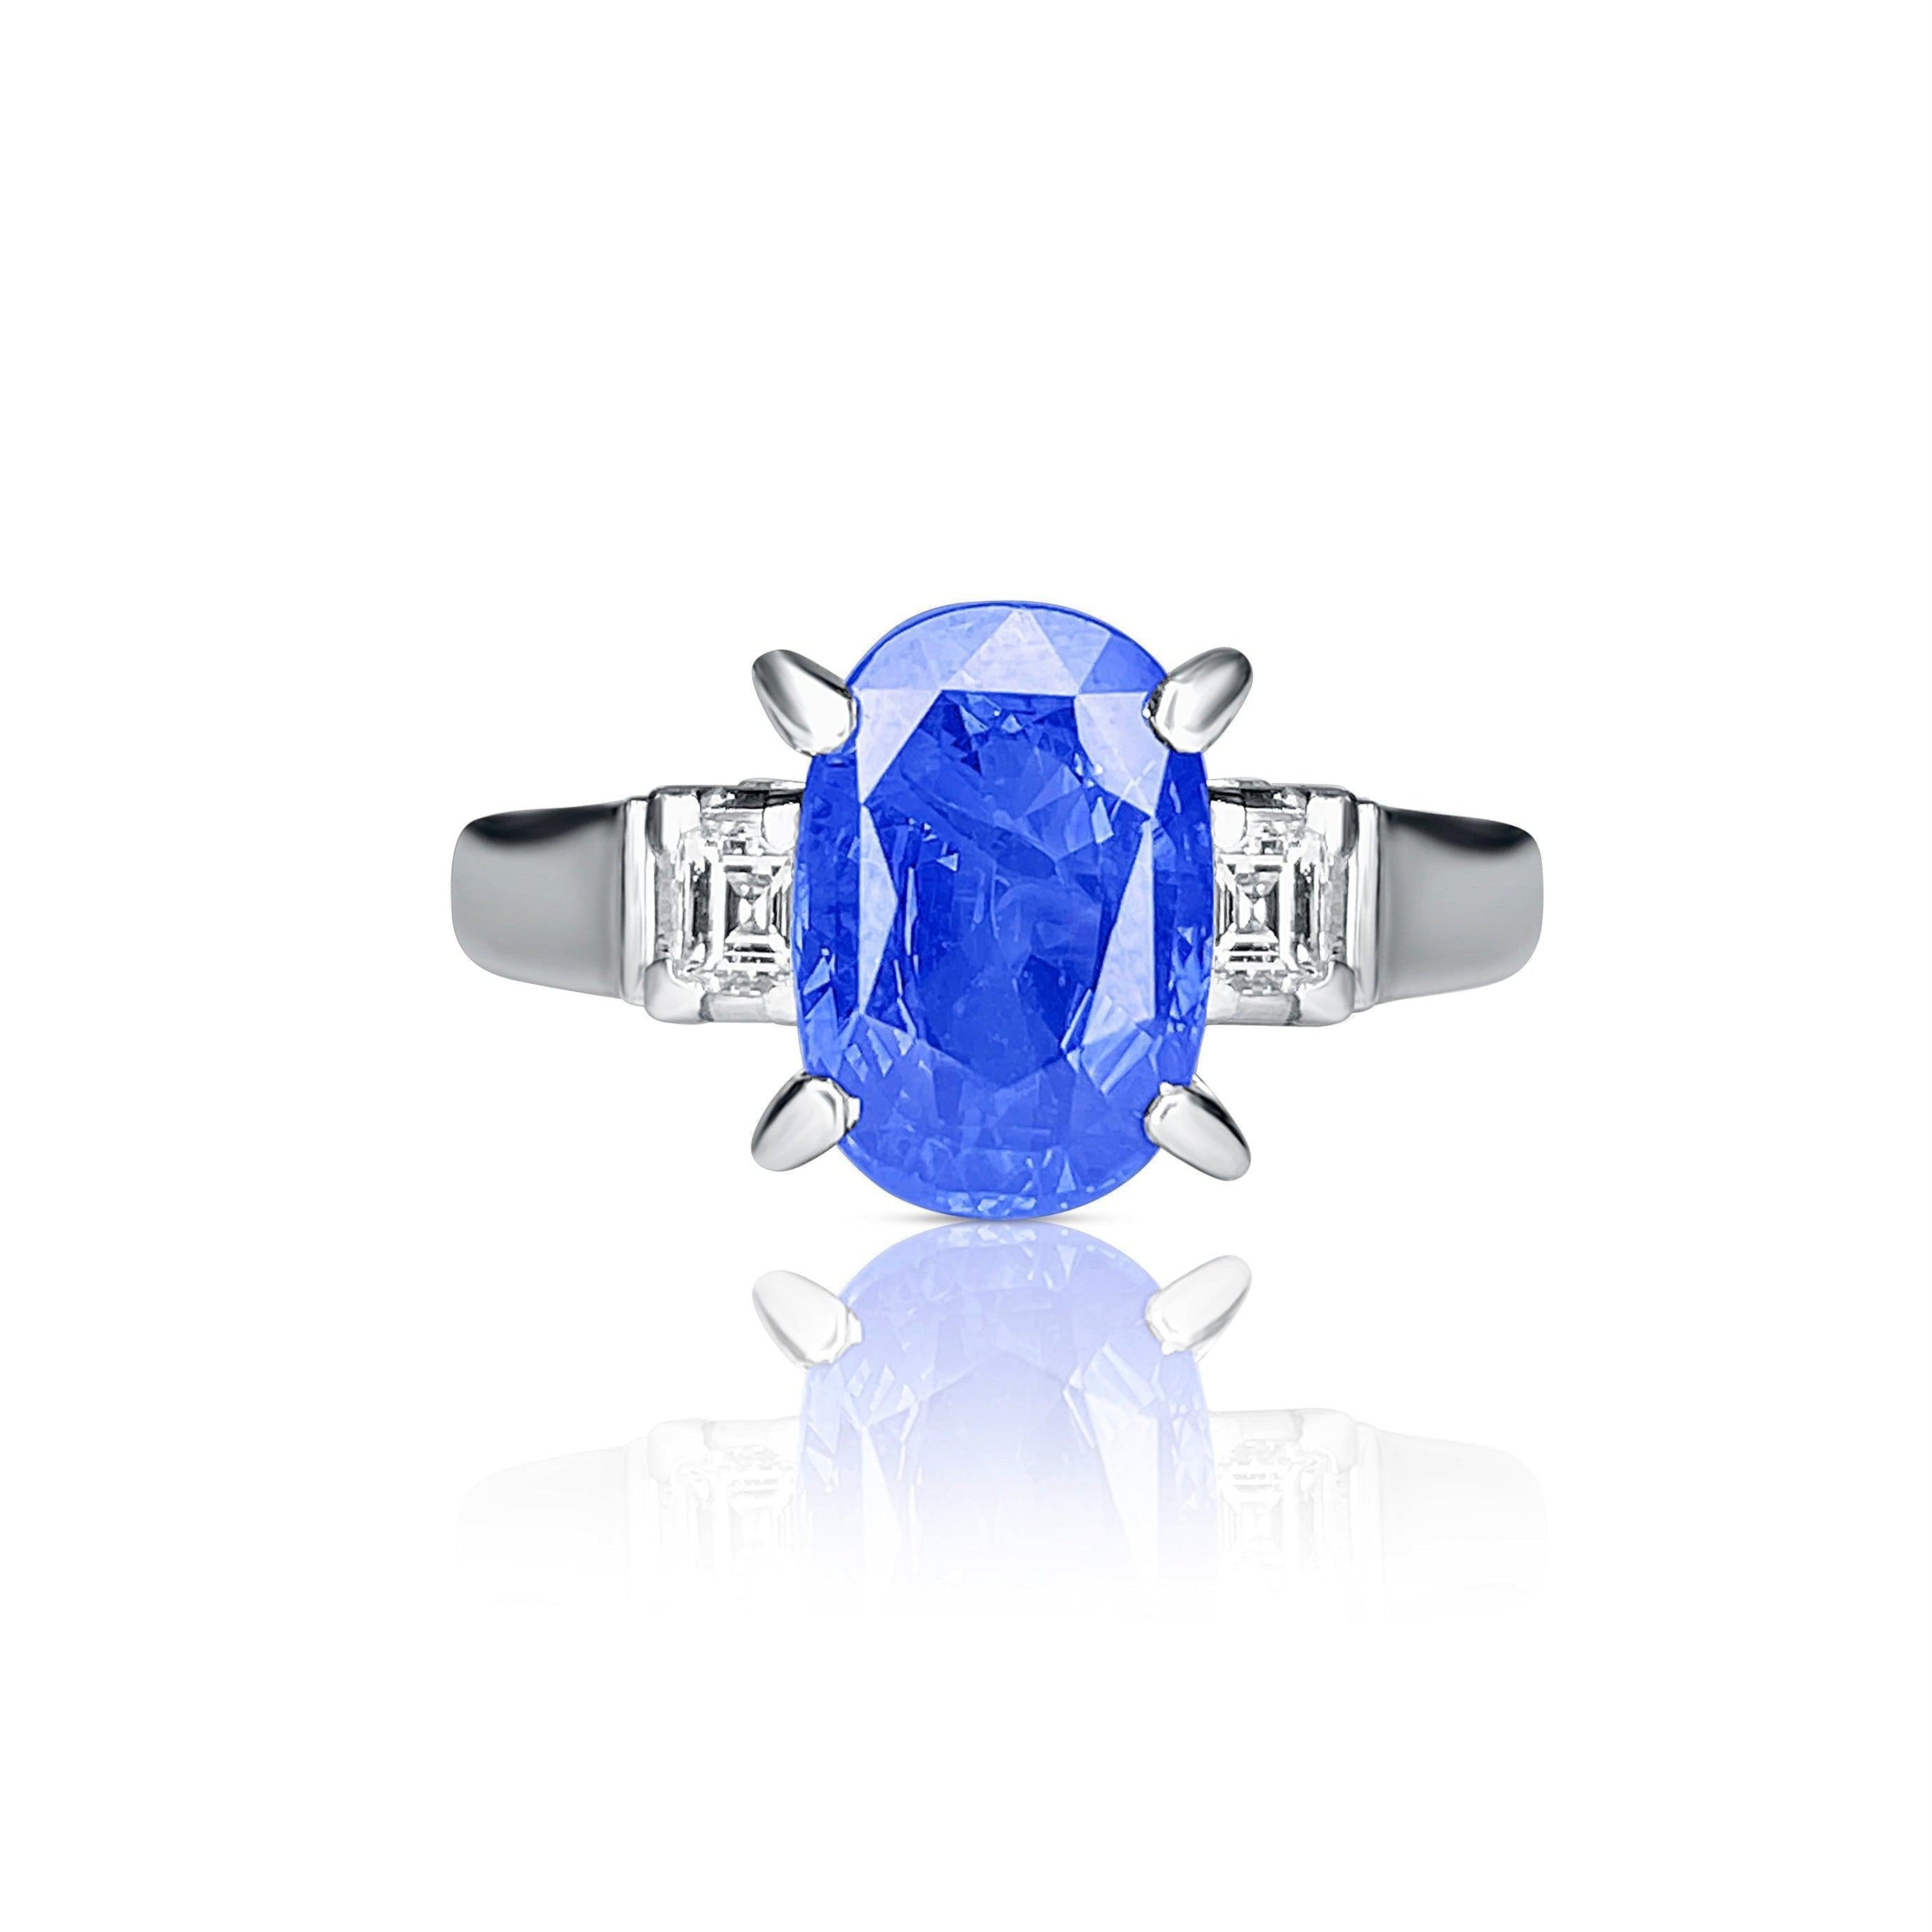 Oval Cut Natural Blue Sapphire Mounted in a Platinum Ring - ASSAY